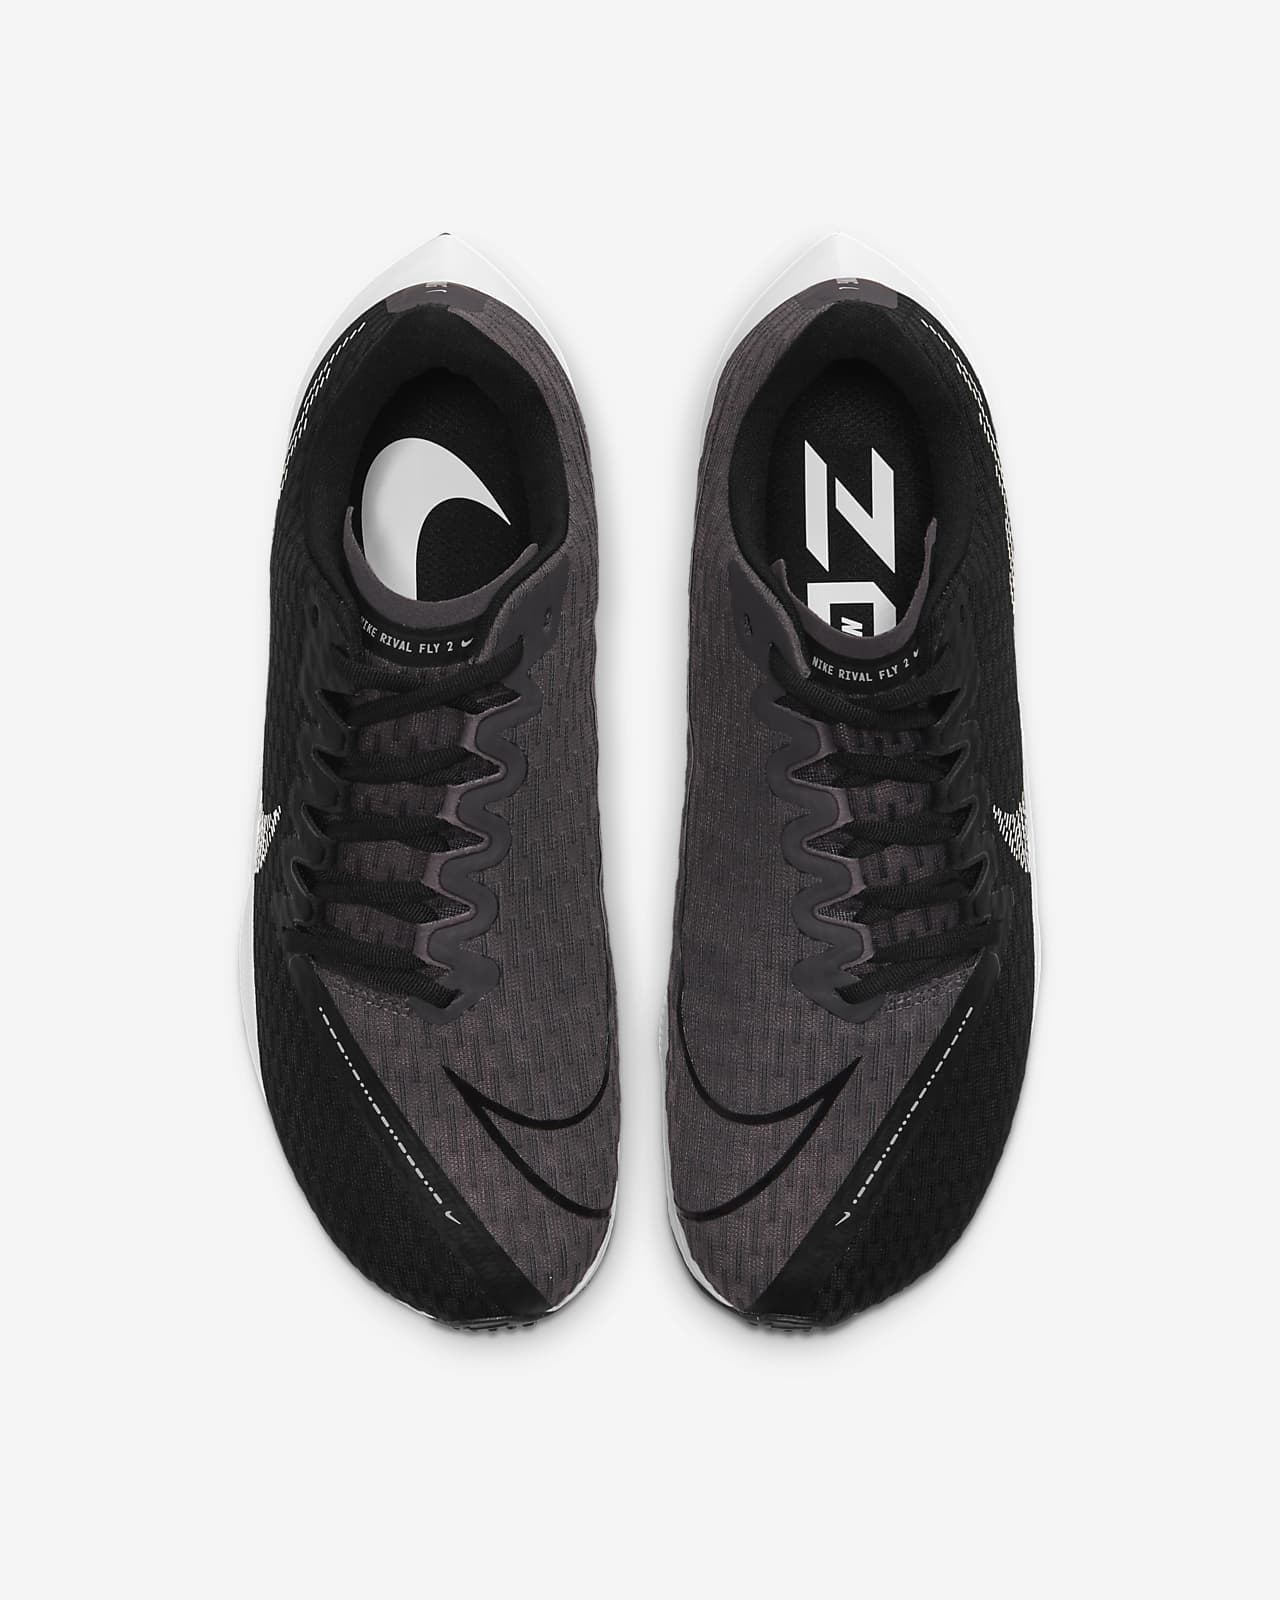 running Nike Zoom Rival Fly 2 